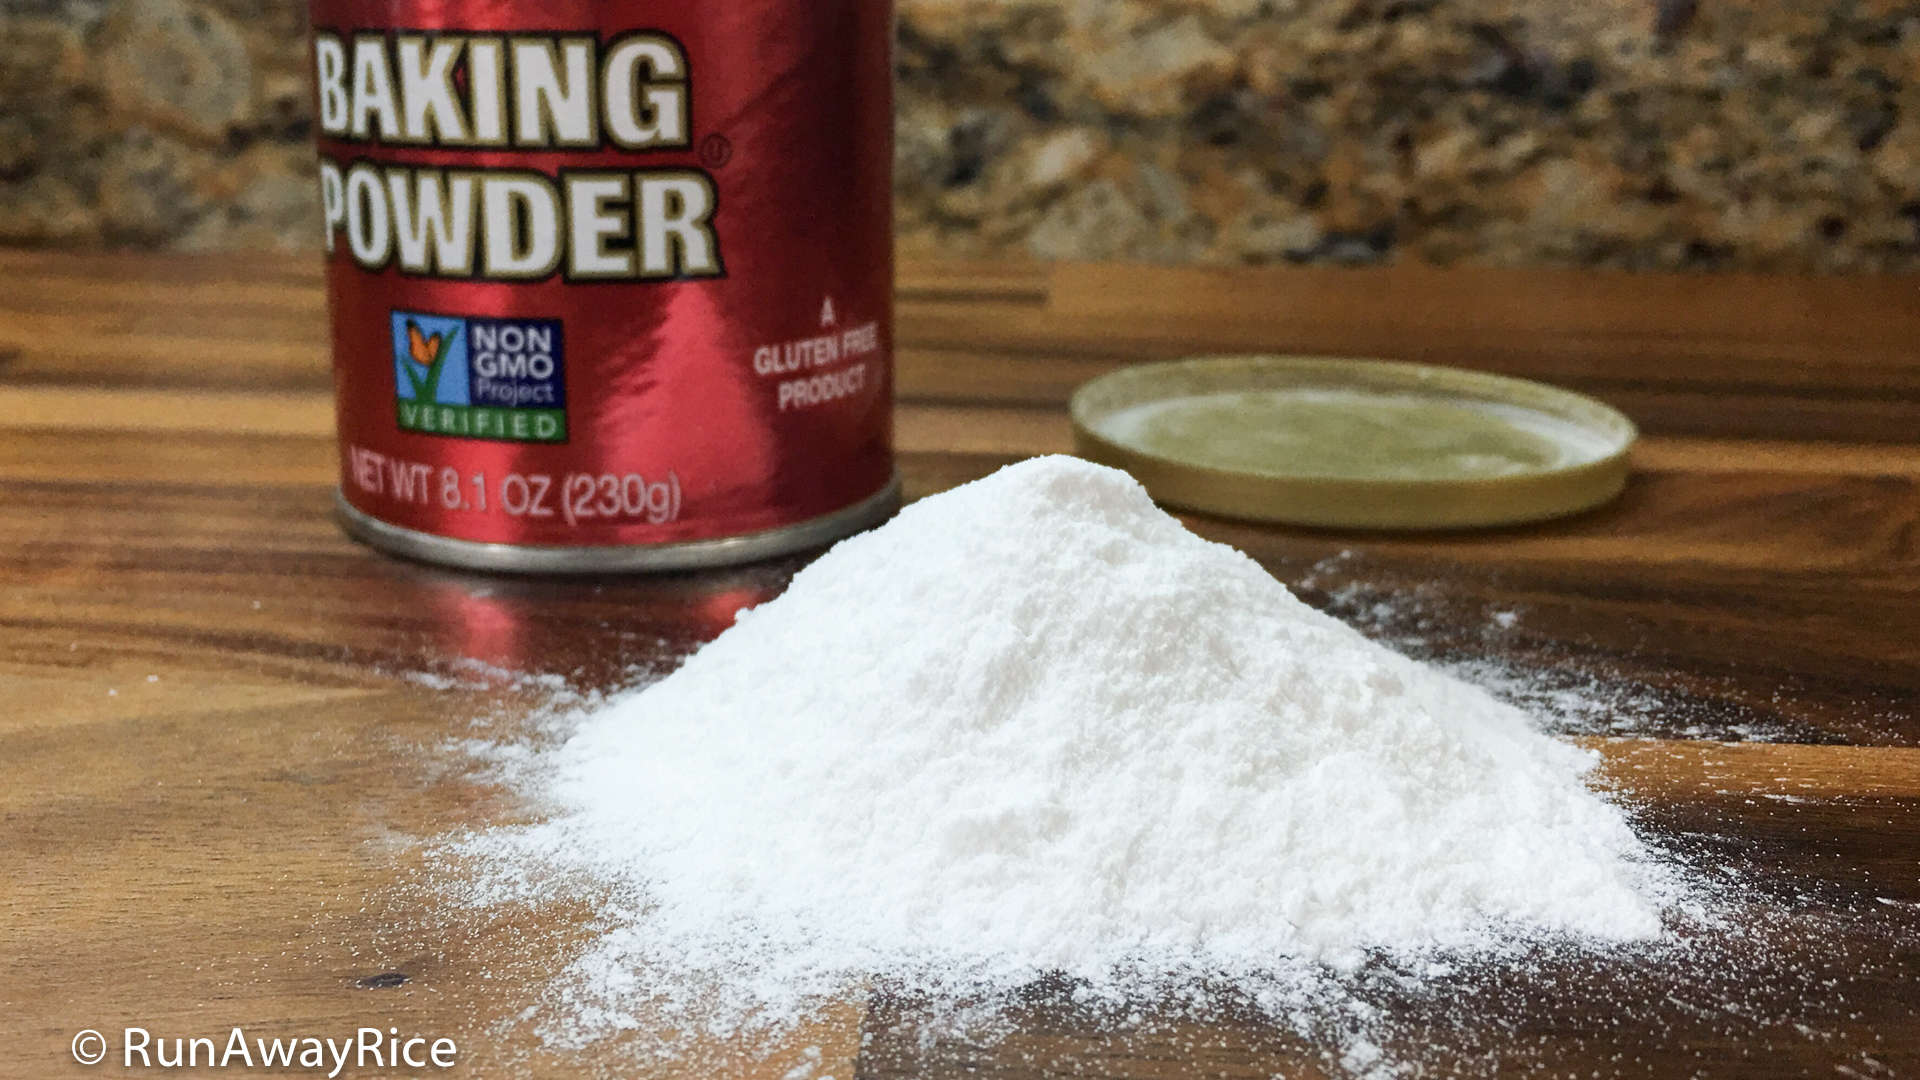 Uses for baking powder